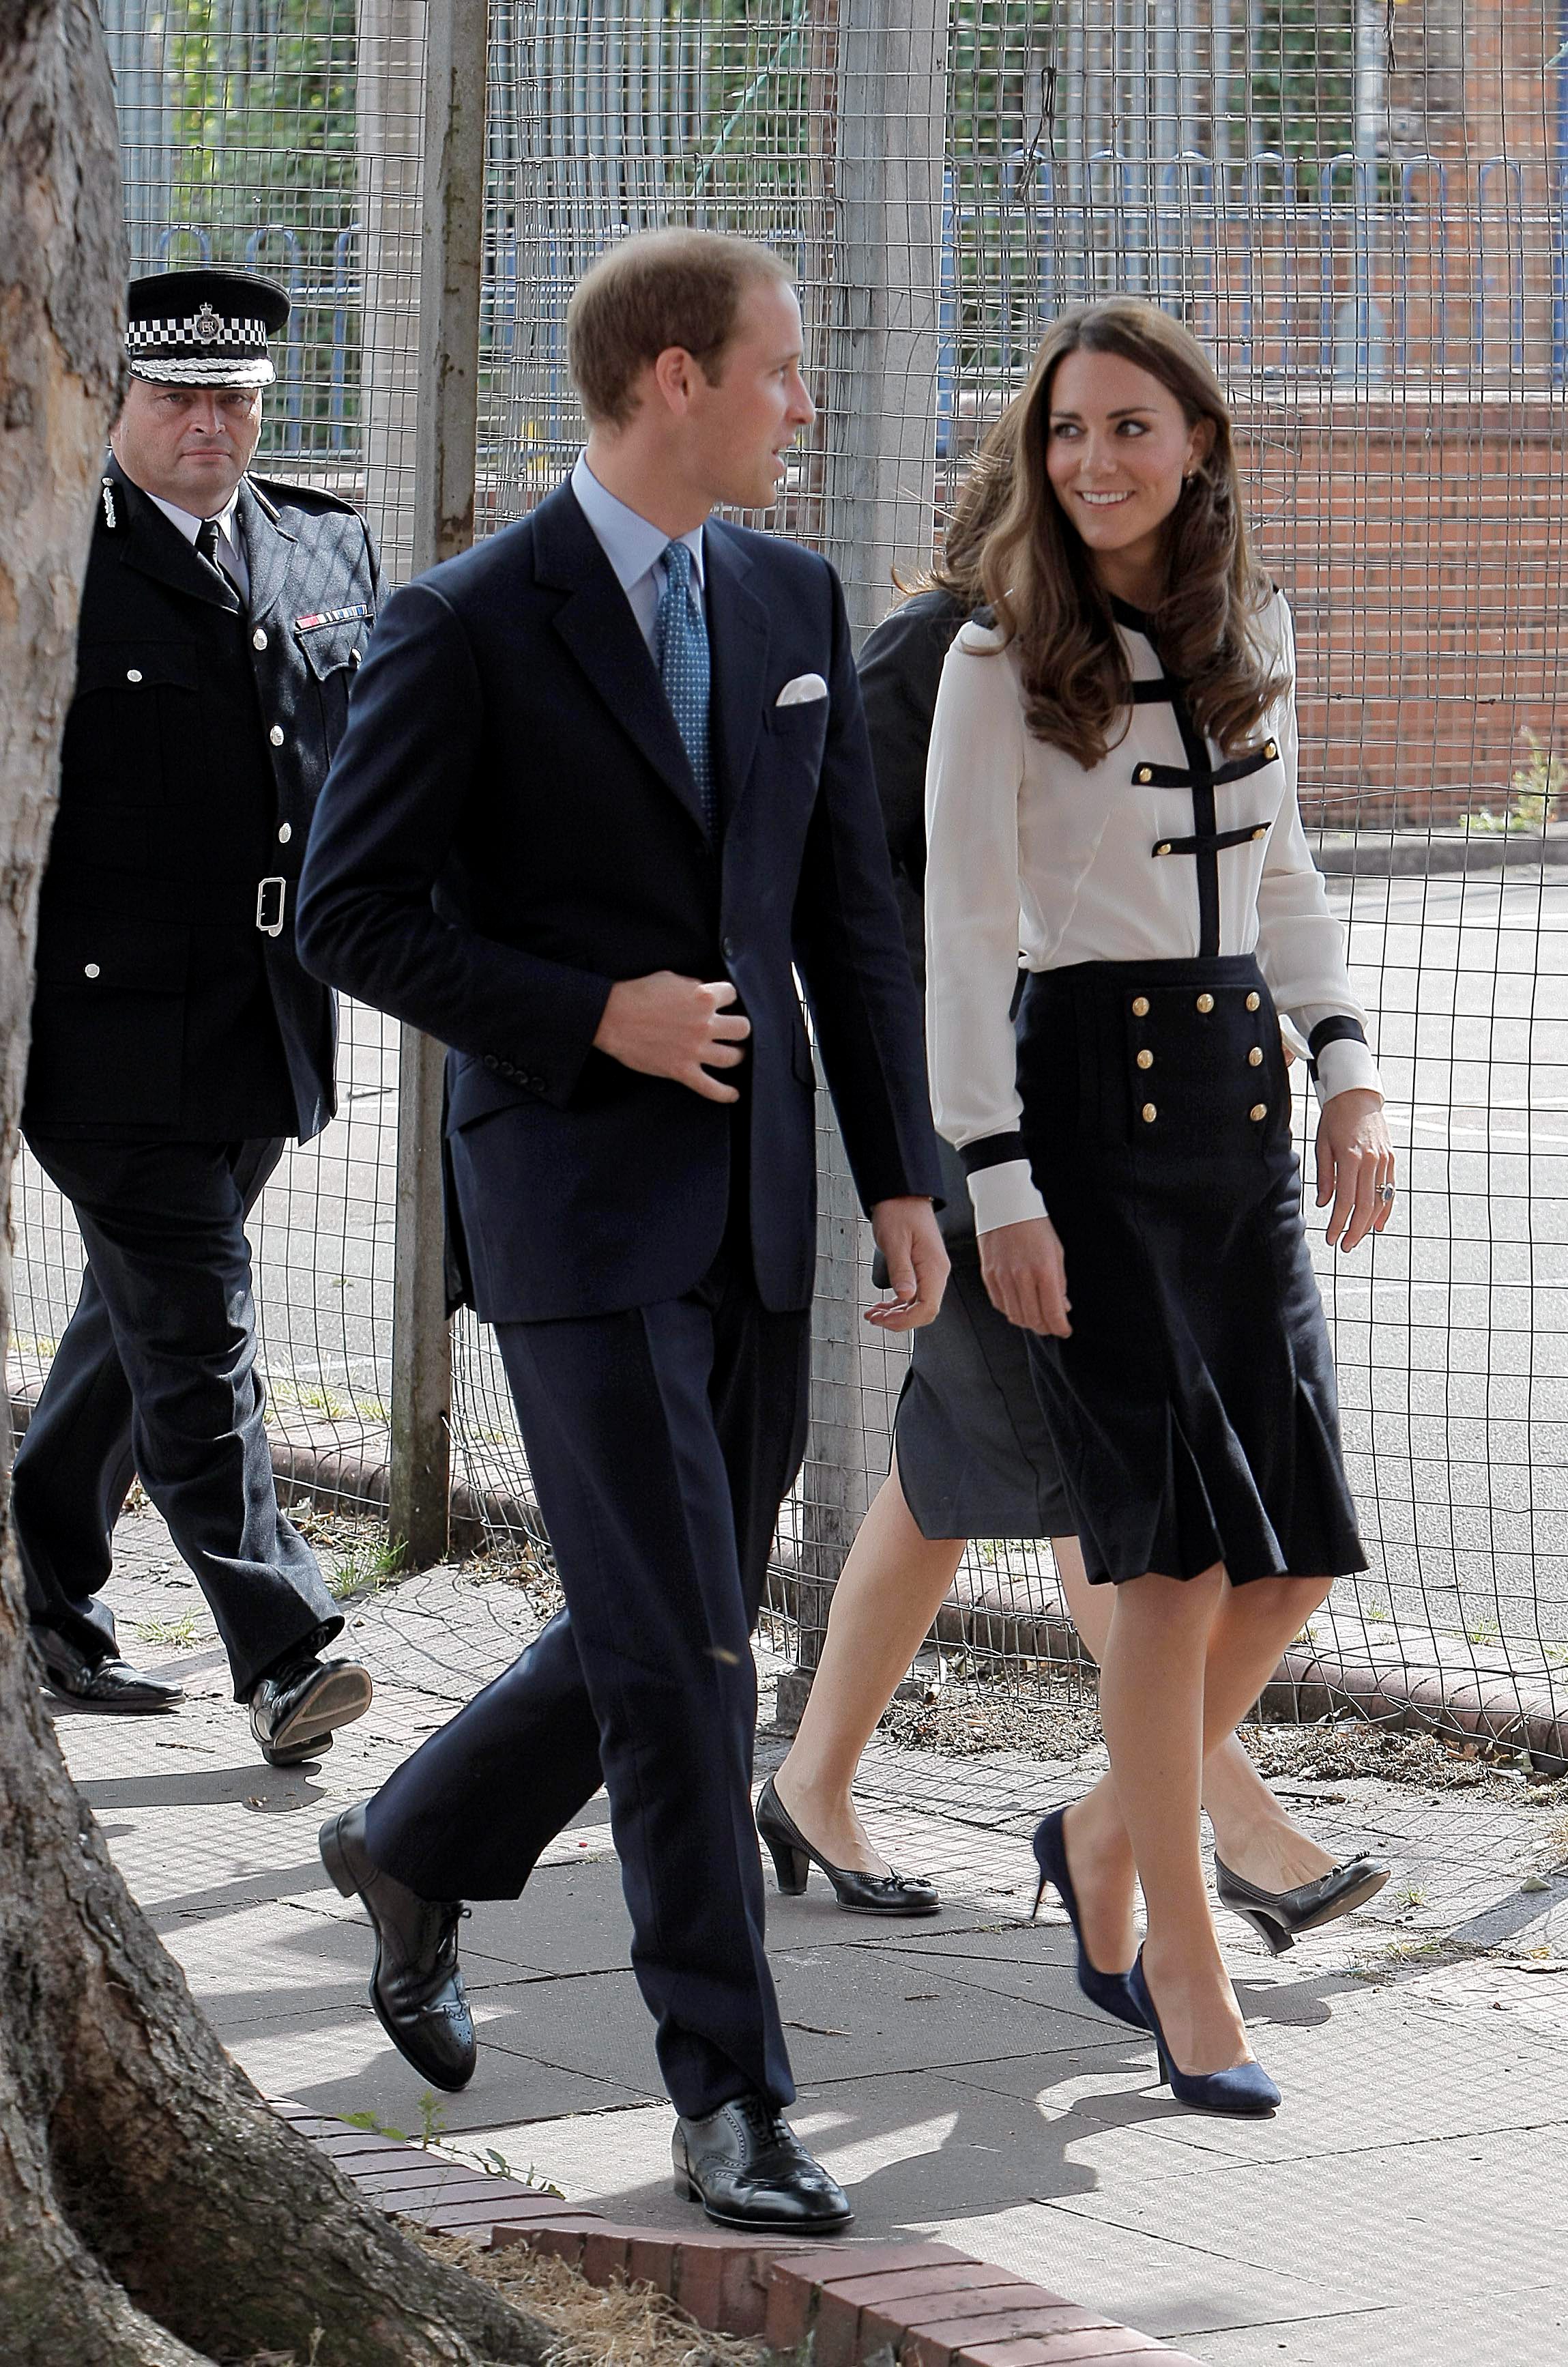 Prince William and Kate Middleton arrive at the Summerfield Community Centre in Birmingham to meet with members of the community who were affected by the riots